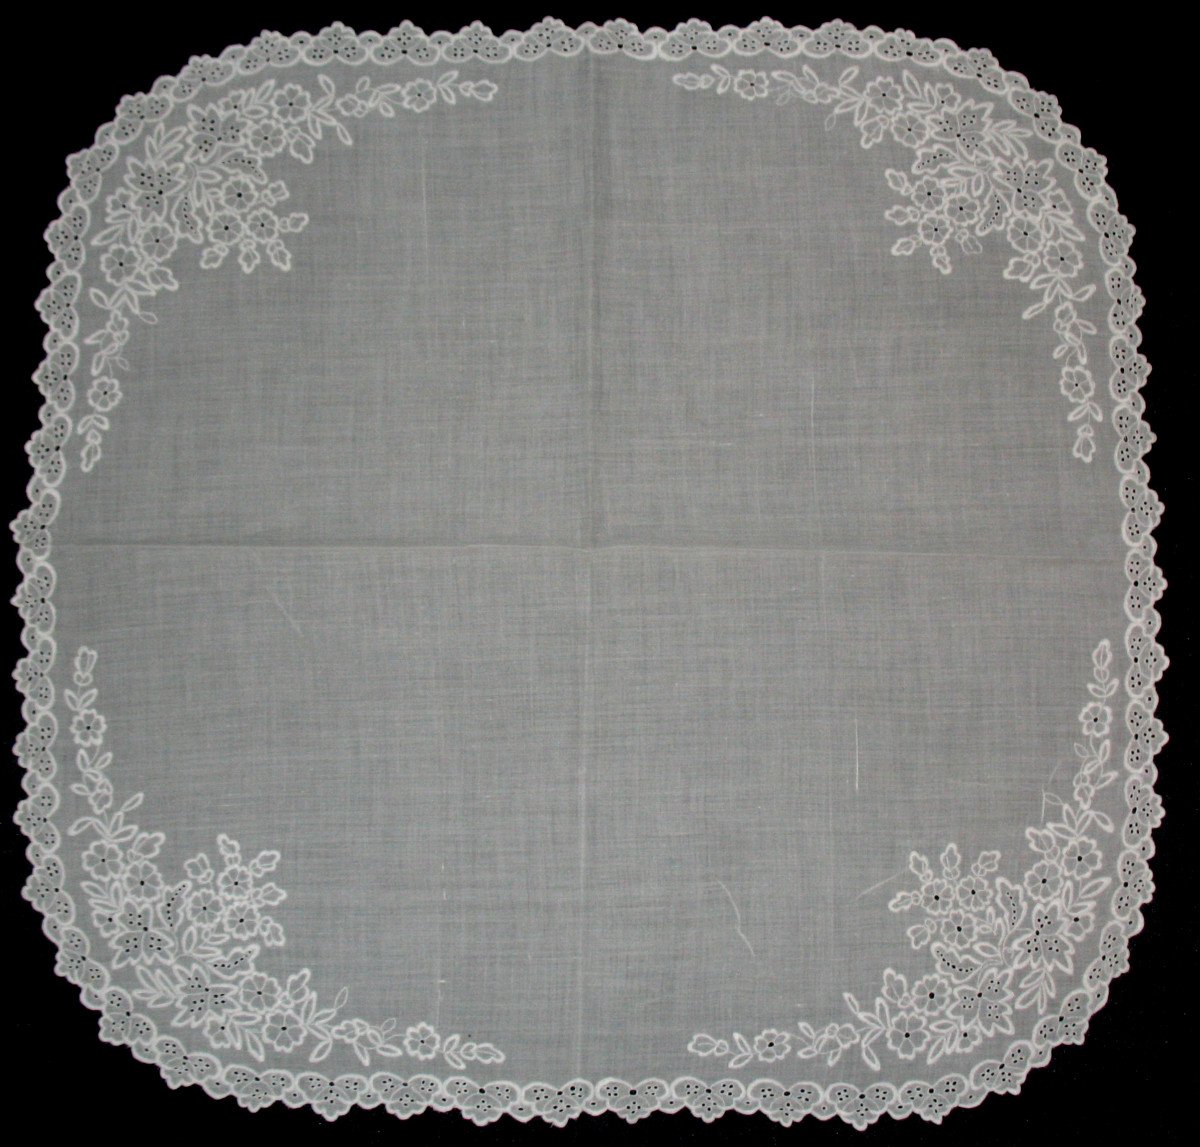 Wedding Handkerchief In White Embroidery On Batiste With Flower Decoration-photo-4